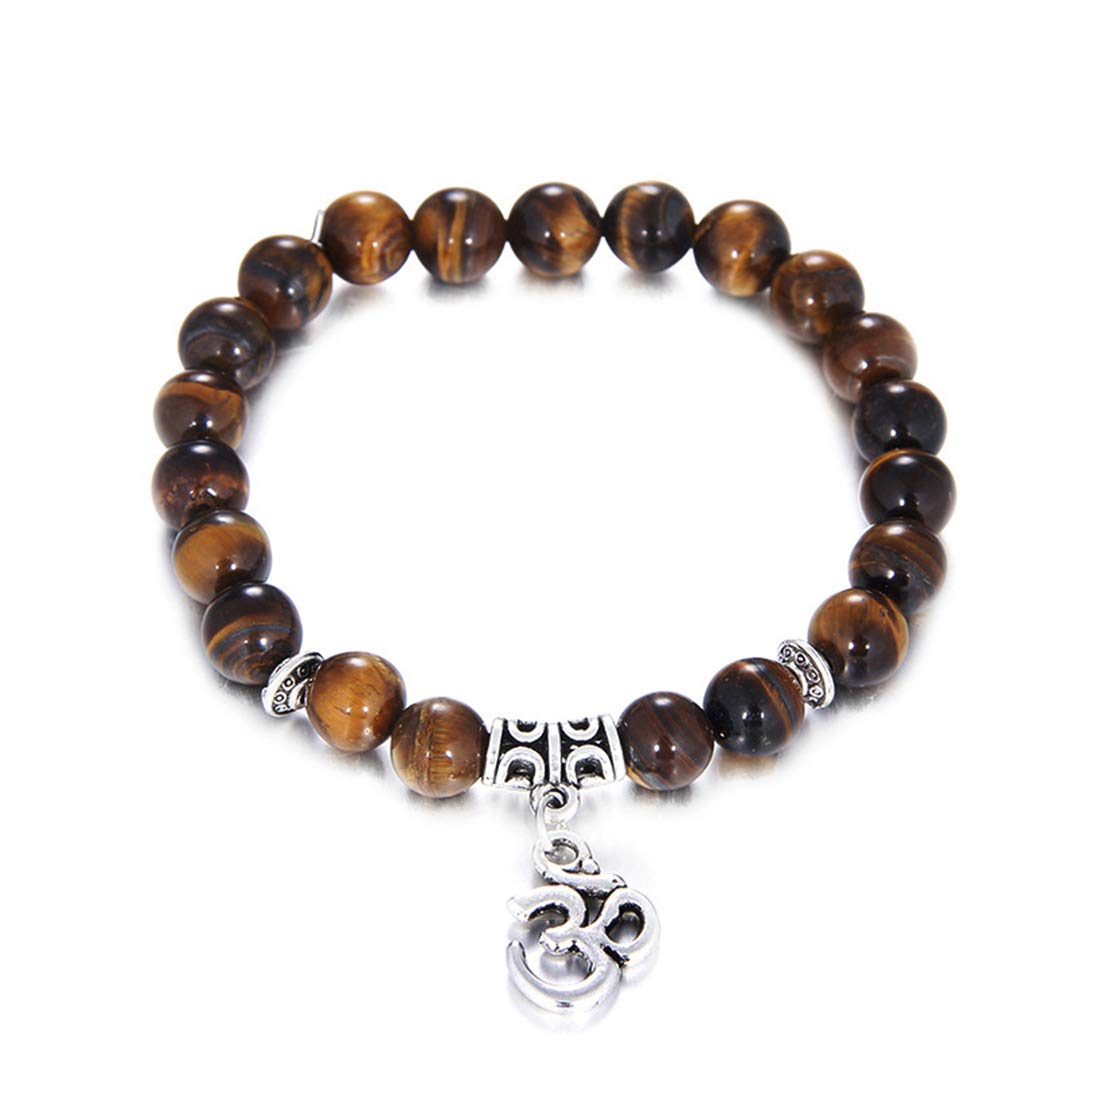 Yellow Chimes King Crown Lion Head Natural Tiger's Eye Stone Volcanic Lava Black Reiki Healing Stretchable Beads Charm Bracelet for Men and Boys